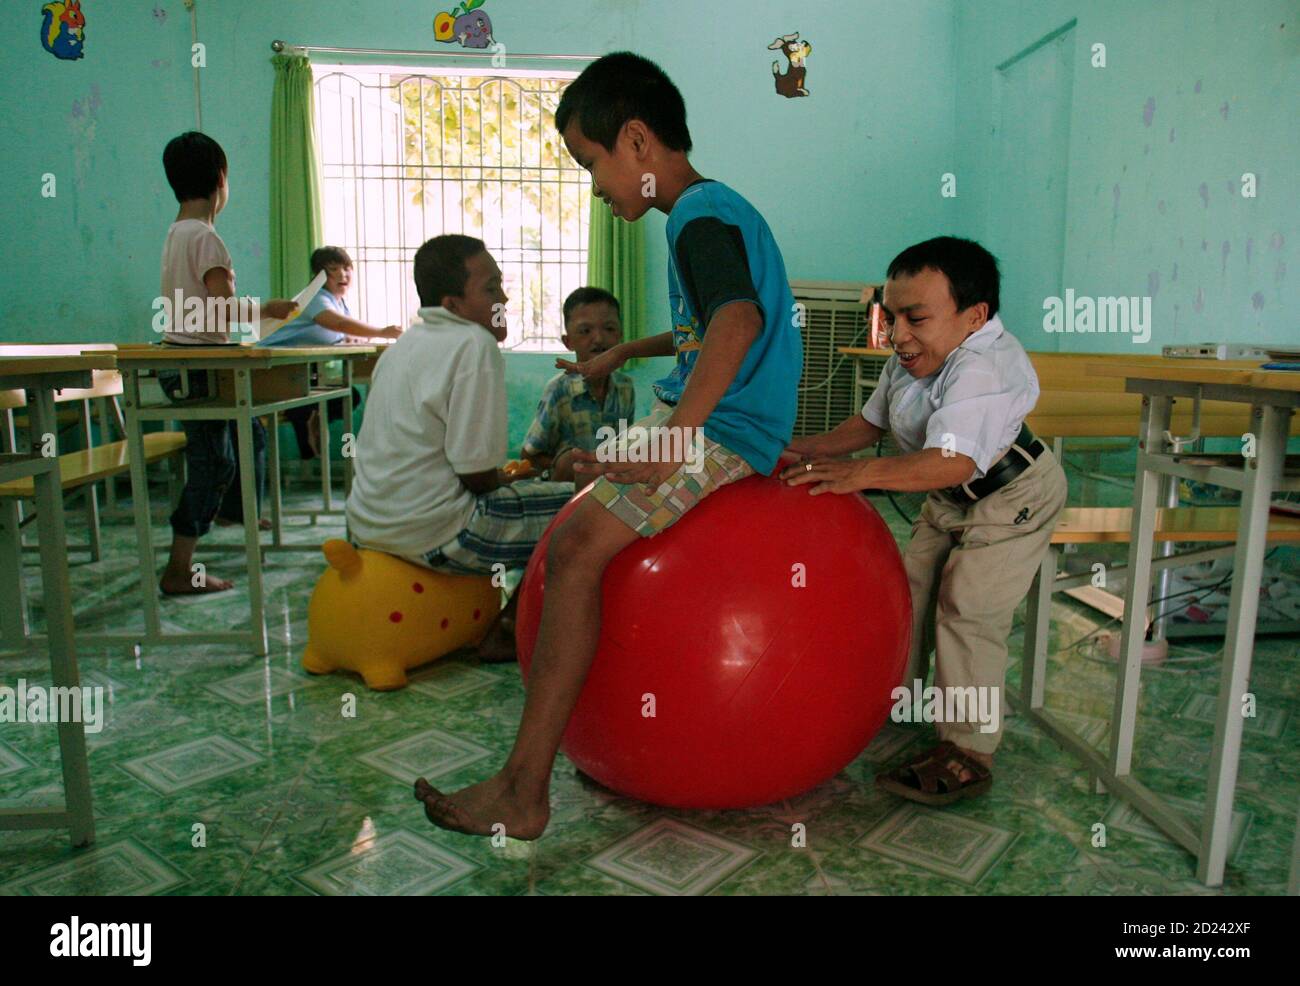 Vietnamese Victims Of The Defoliant Agent Orange Play At A Social Sponsorship Centre In Vietnam S Danang City June 26 09 U S Warplanes Dropped About 18 Million Gallons Of The Defoliant On Southern